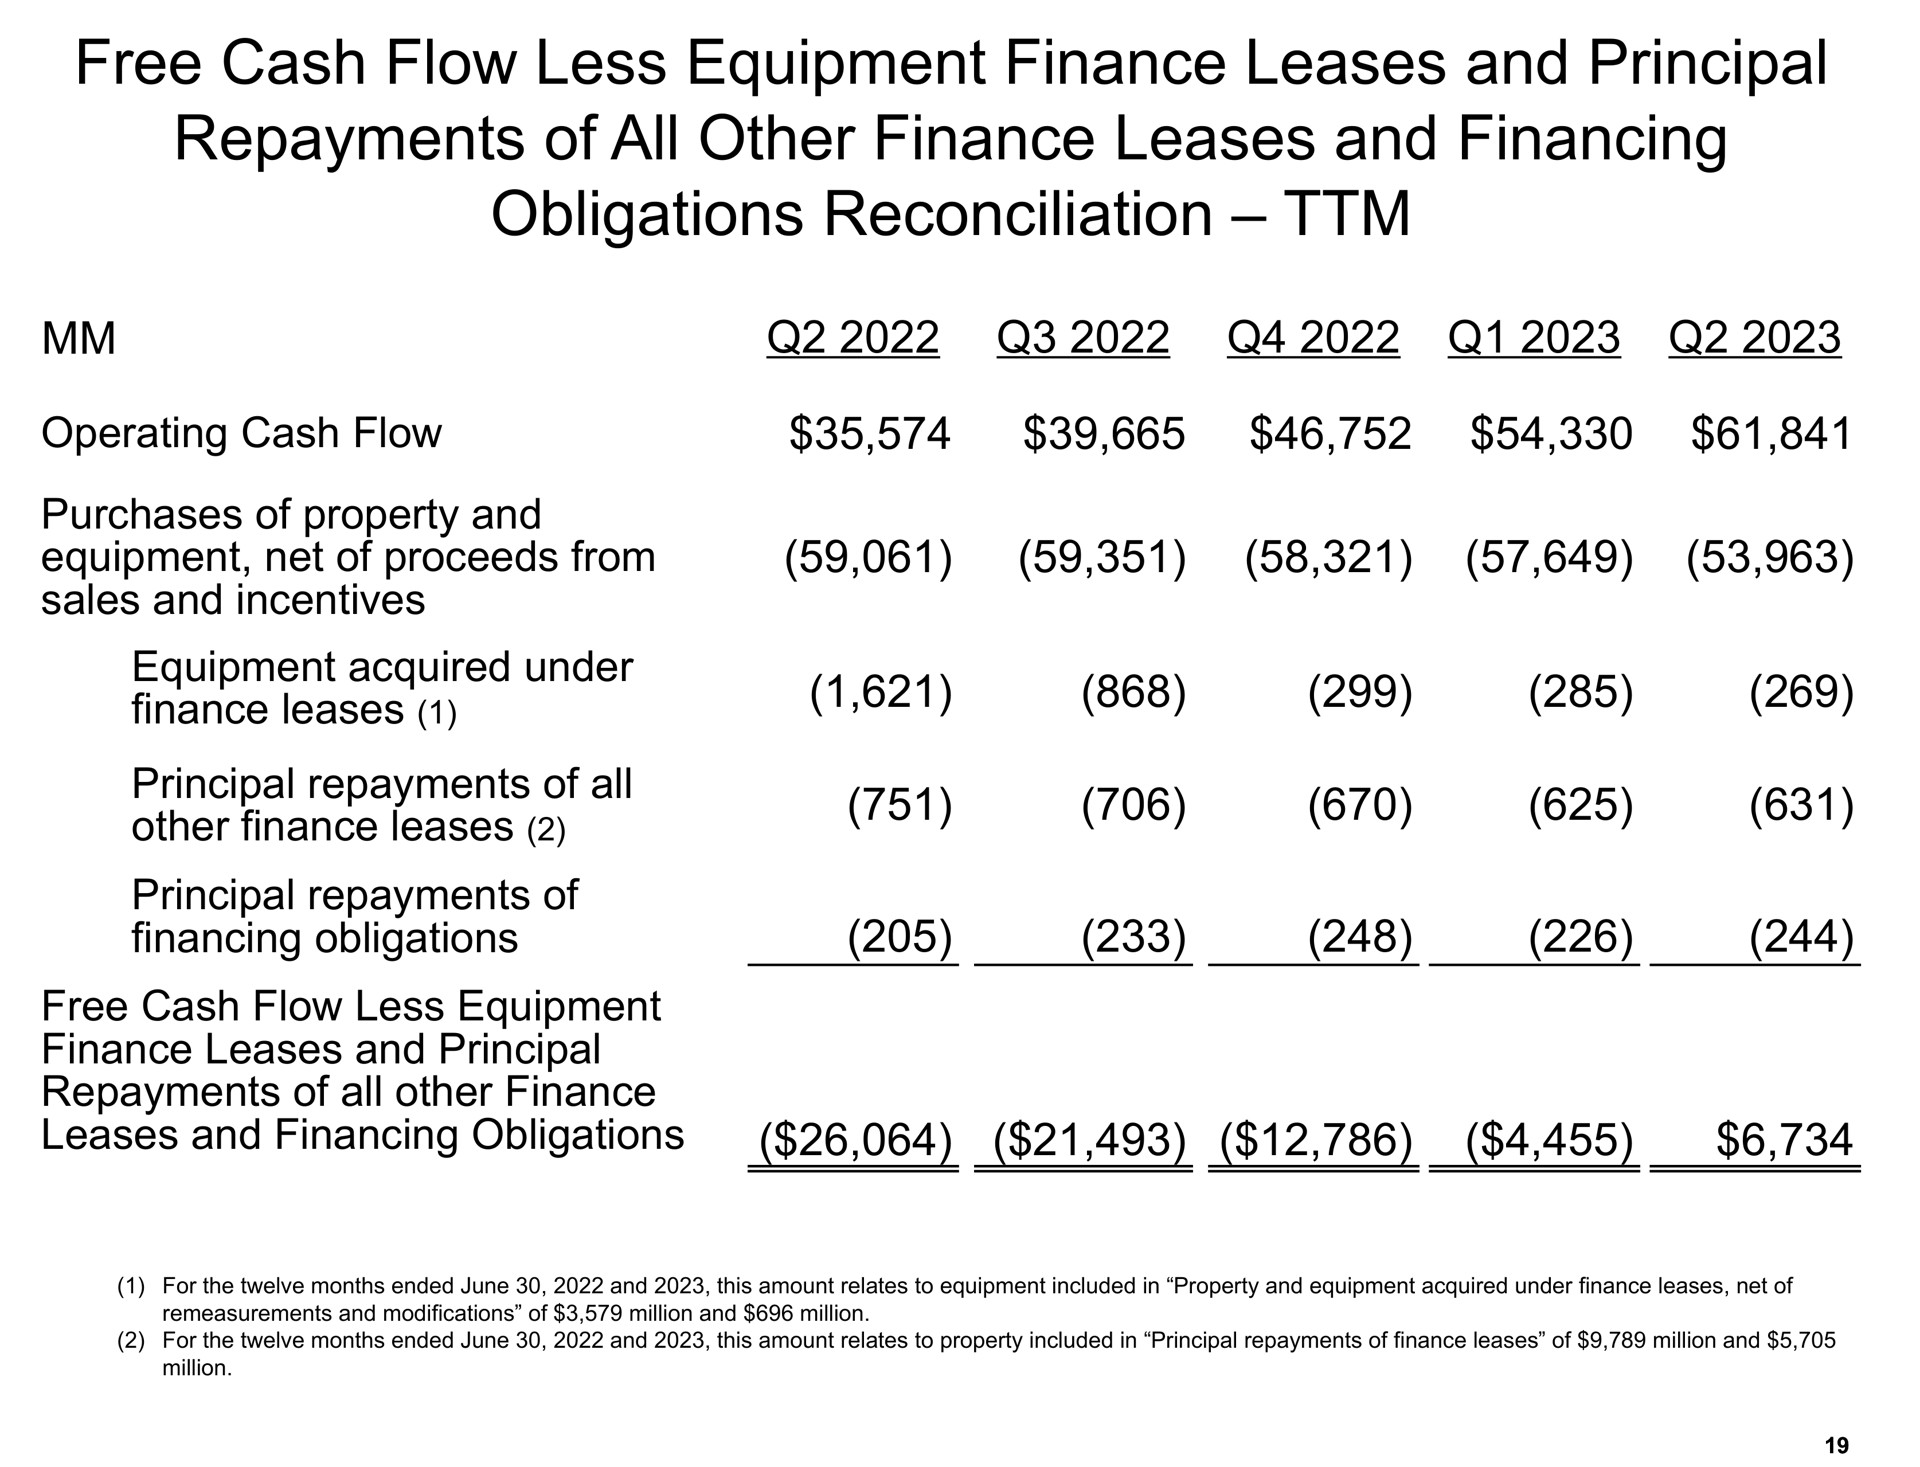 free cash flow less equipment finance leases and principal repayments of all other finance leases and financing obligations reconciliation | Amazon